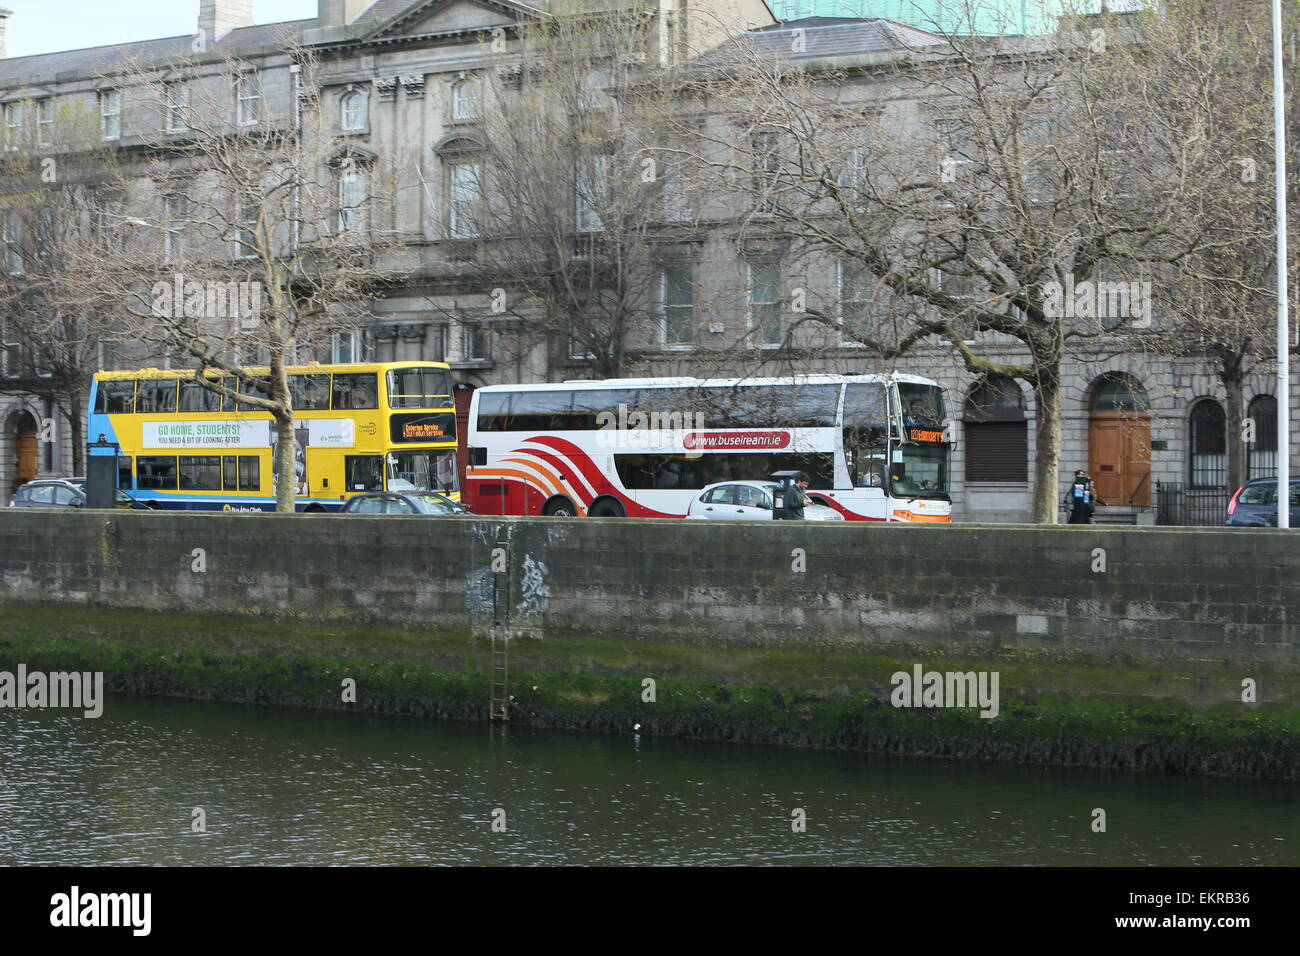 Image of Dublin Bus  and Bus Eireann vehicles on a street in Dublin city centre. A threatened bus strike by workers is set to ta Stock Photo